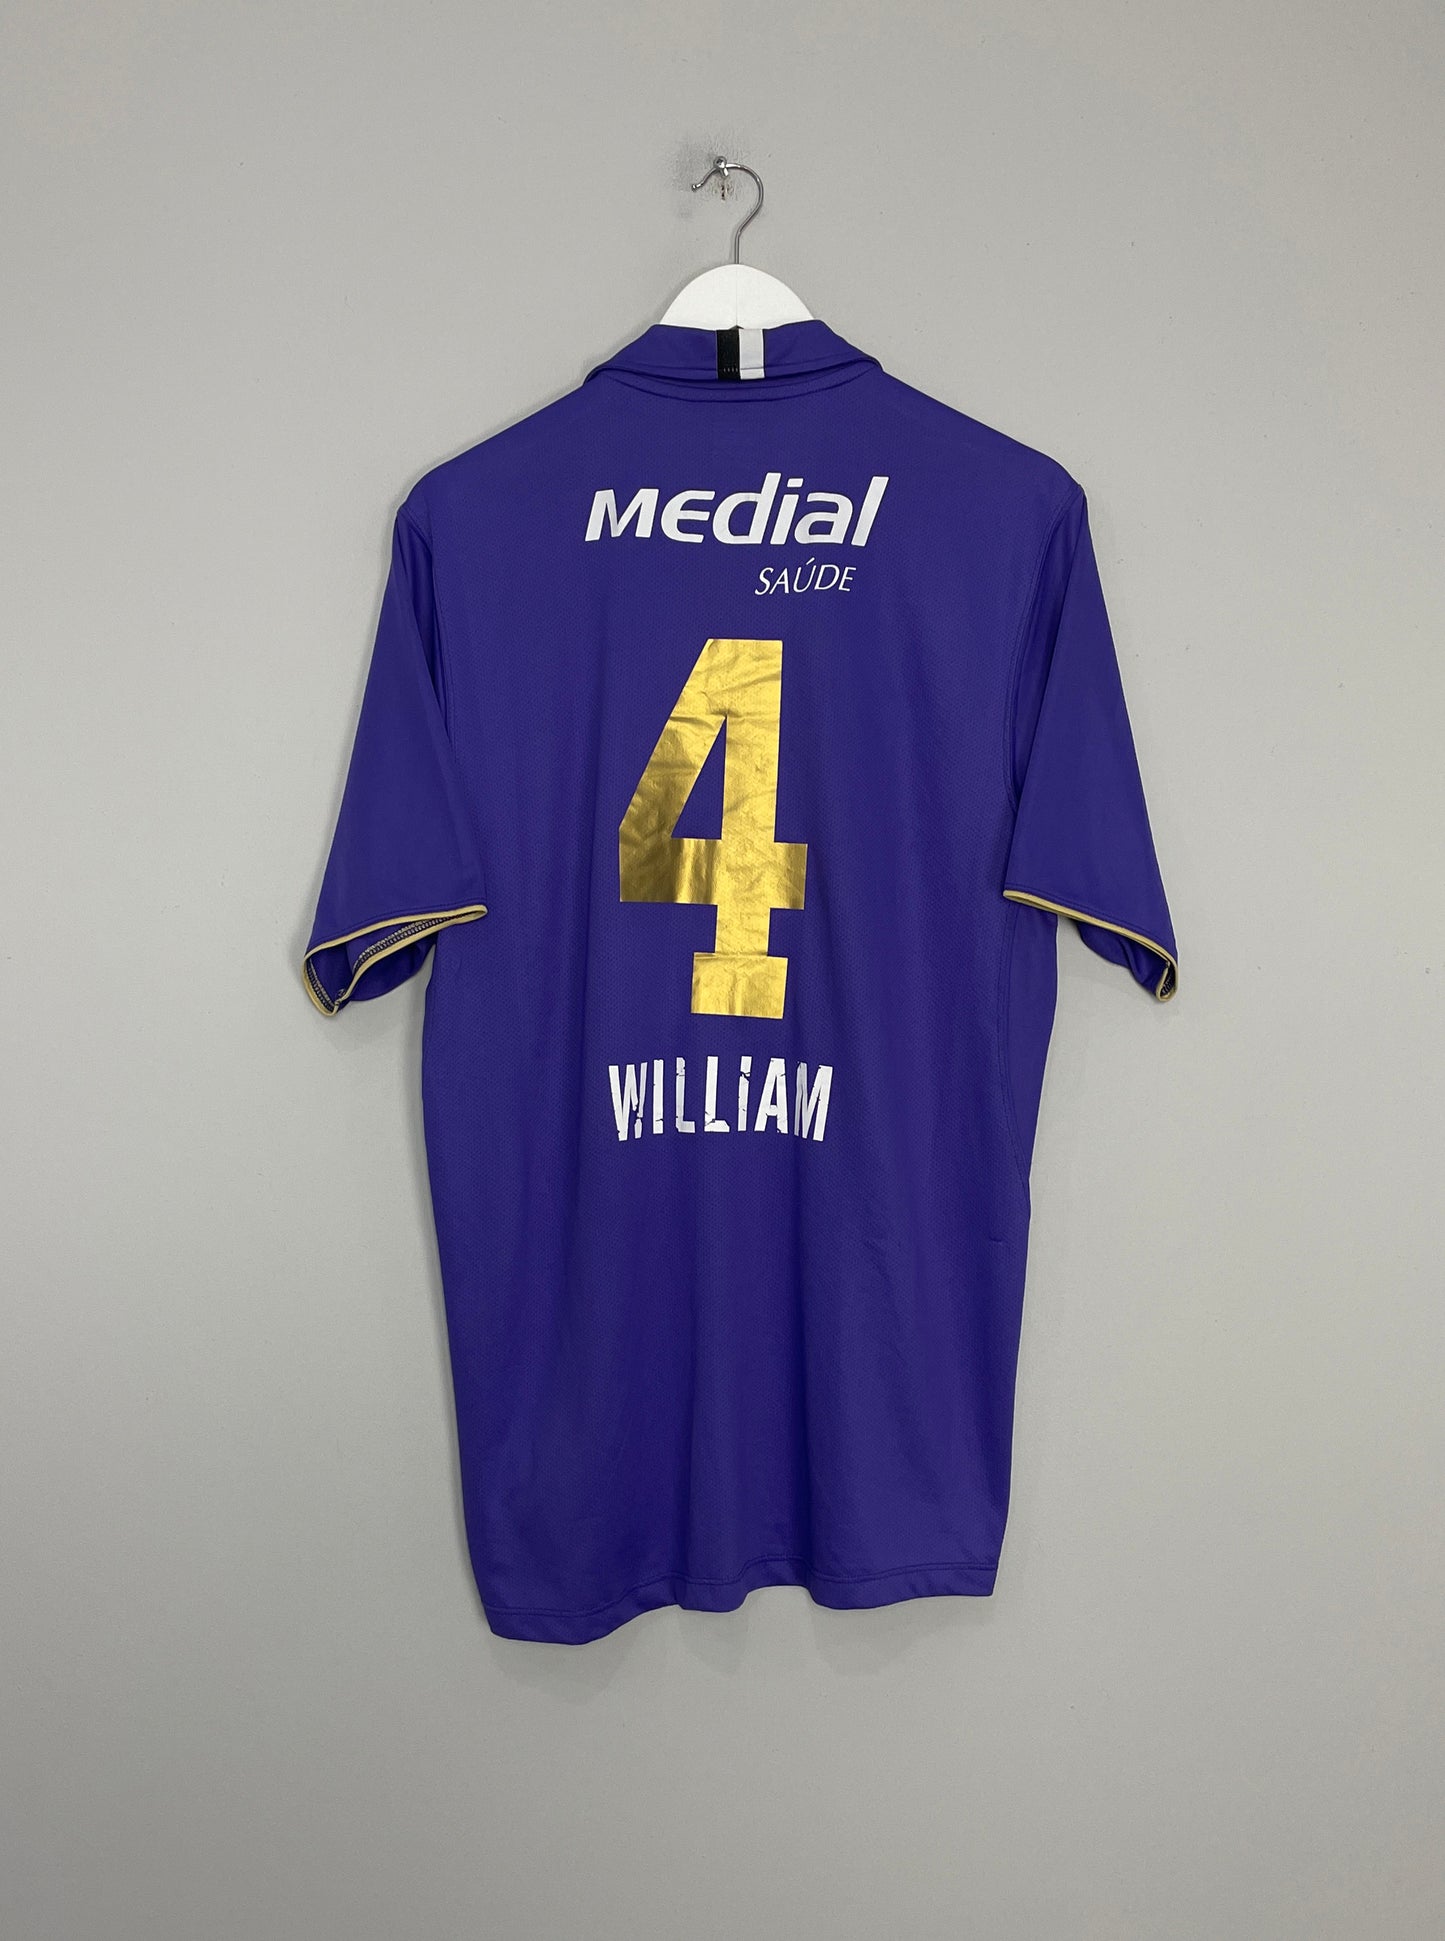 Image of the Corinthians William shirt from the 2008/09 season